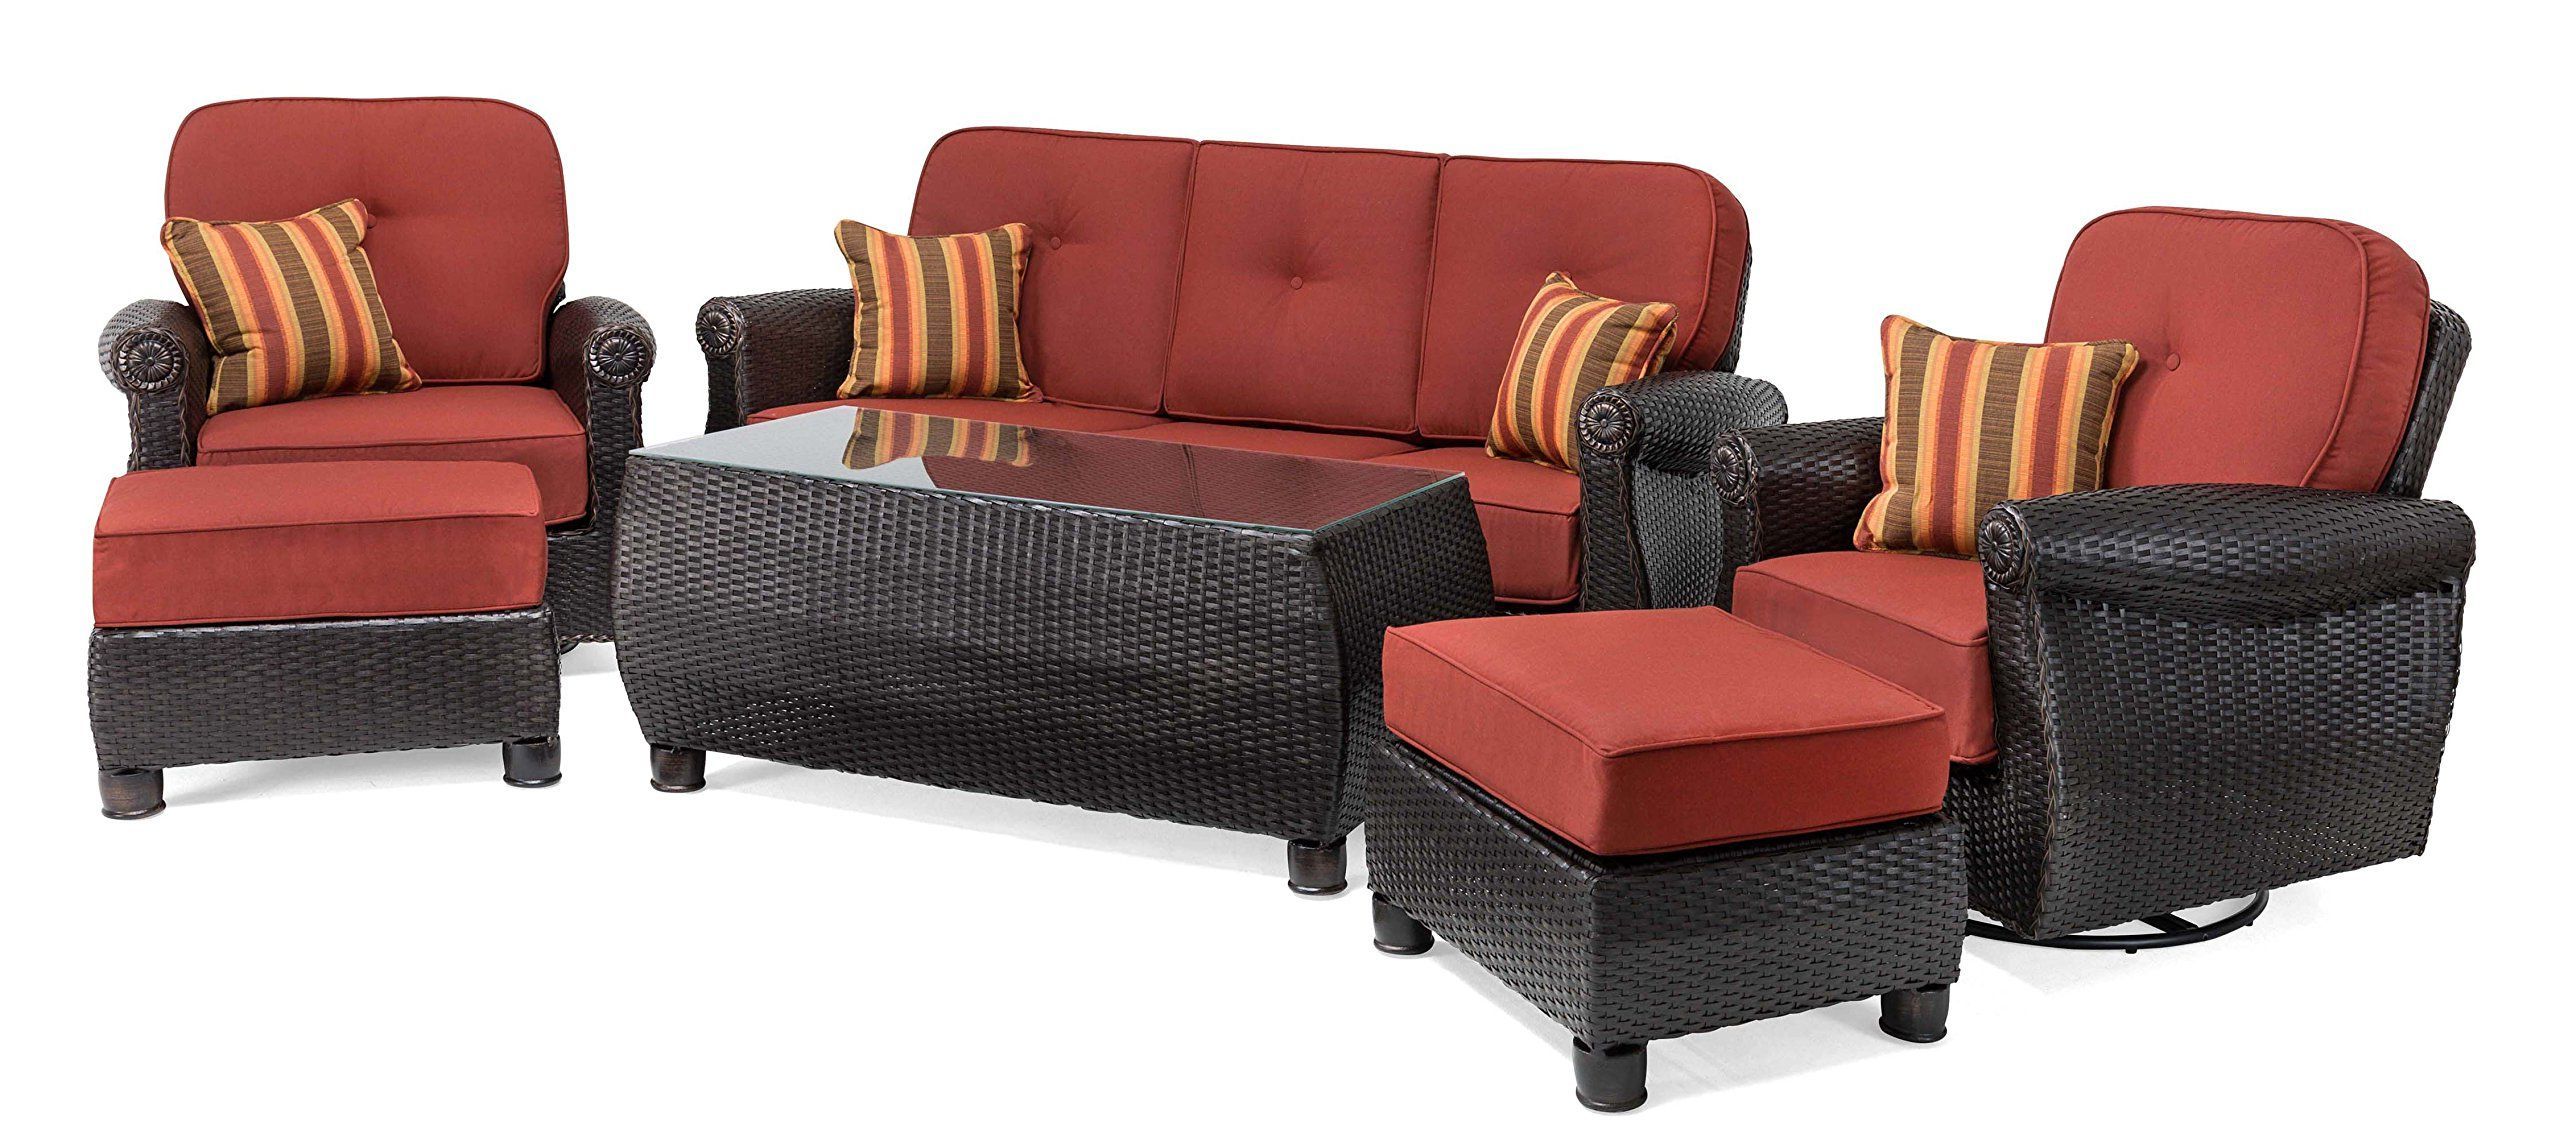 Well Known Lazboy Outdoor Breckenridge 6 Piece Resin Wicker Patio Furniture Pertaining To Red Loveseat Outdoor Conversation Sets (View 12 of 15)